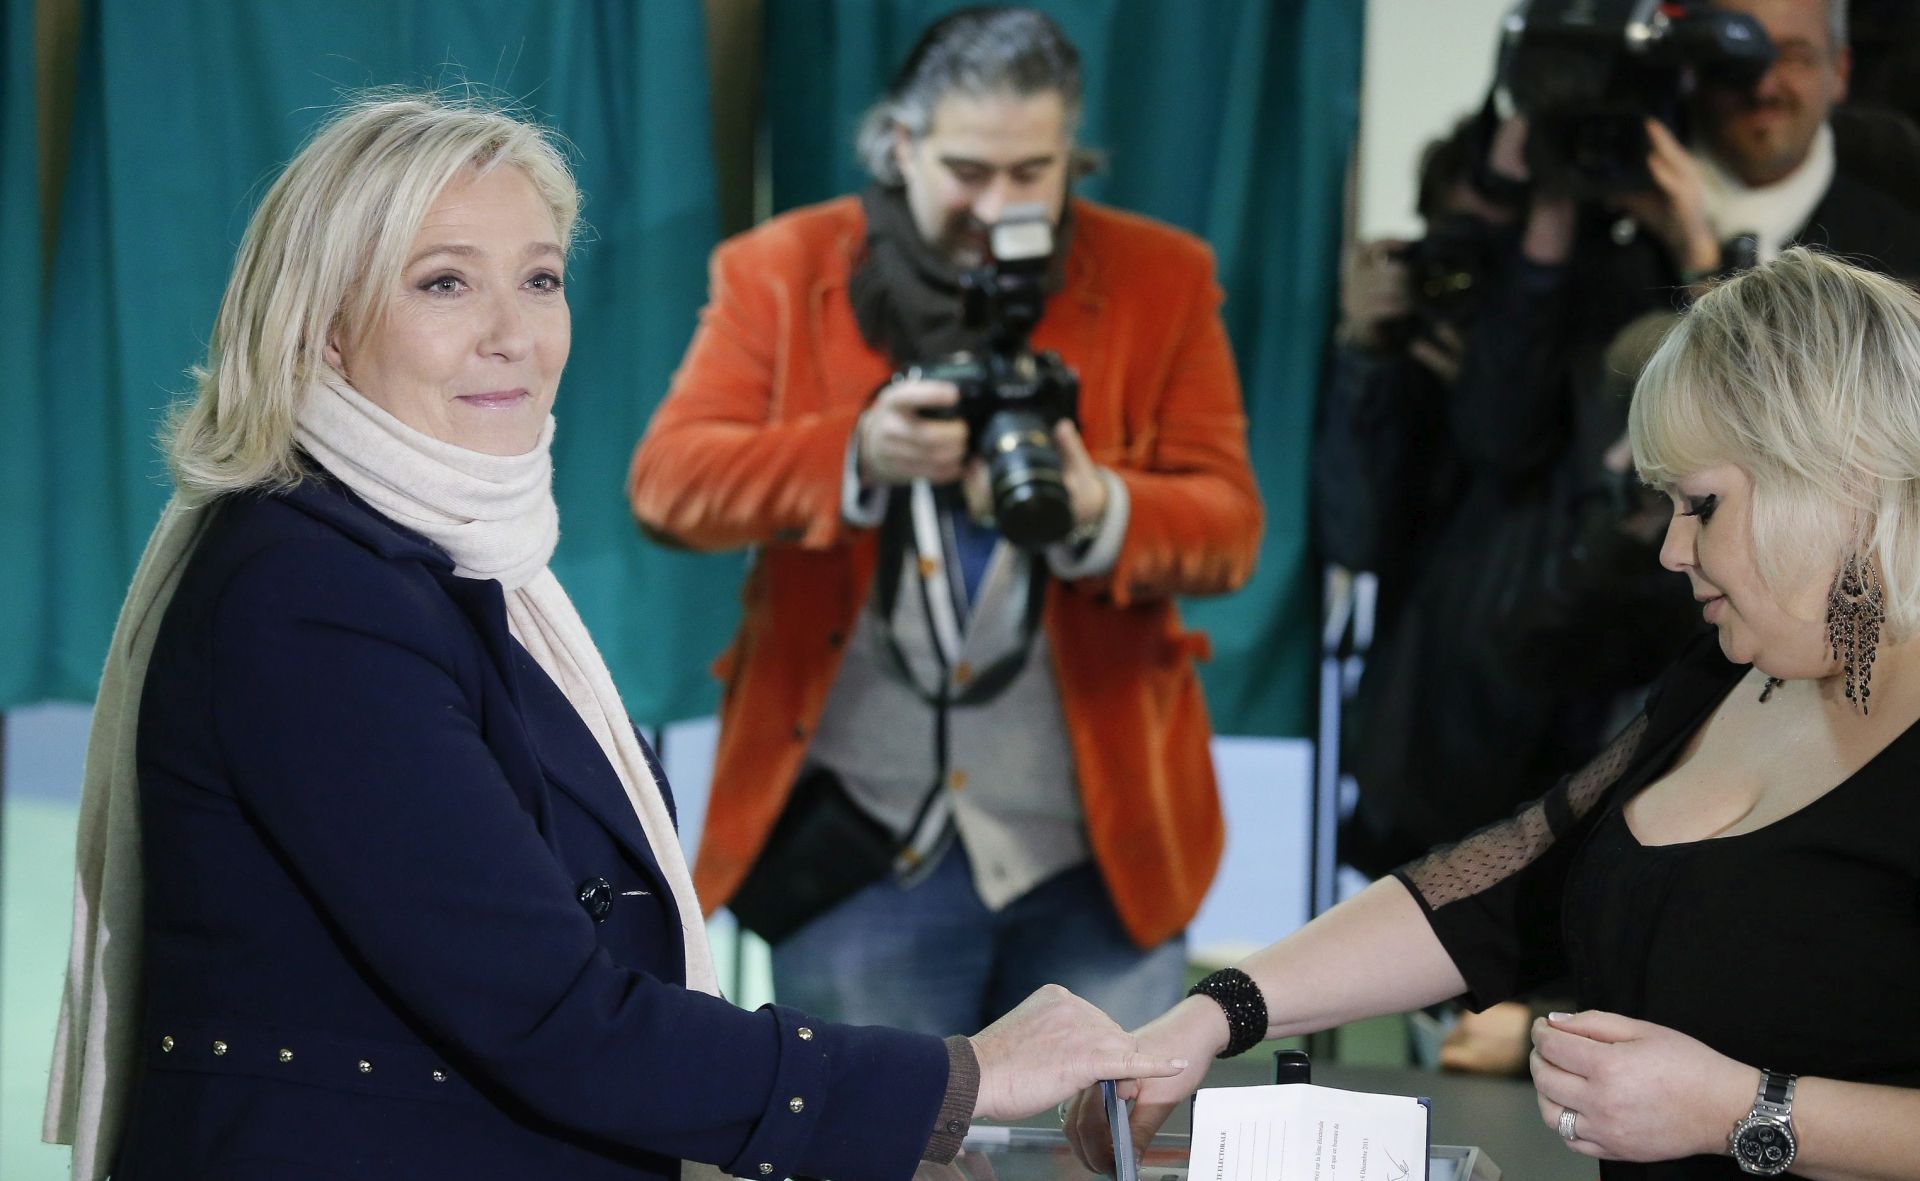 epa05056513 French far-right political party National Front (FN) Marine Le Pen cast her vote at a polling station during the first round of the regional elections in Henin-Beaumont, Northern France, 06 December 2015. France goes to the polls in a two-round regional election on 06 and 13 December 2015.  EPA/JULIEN WARNAND